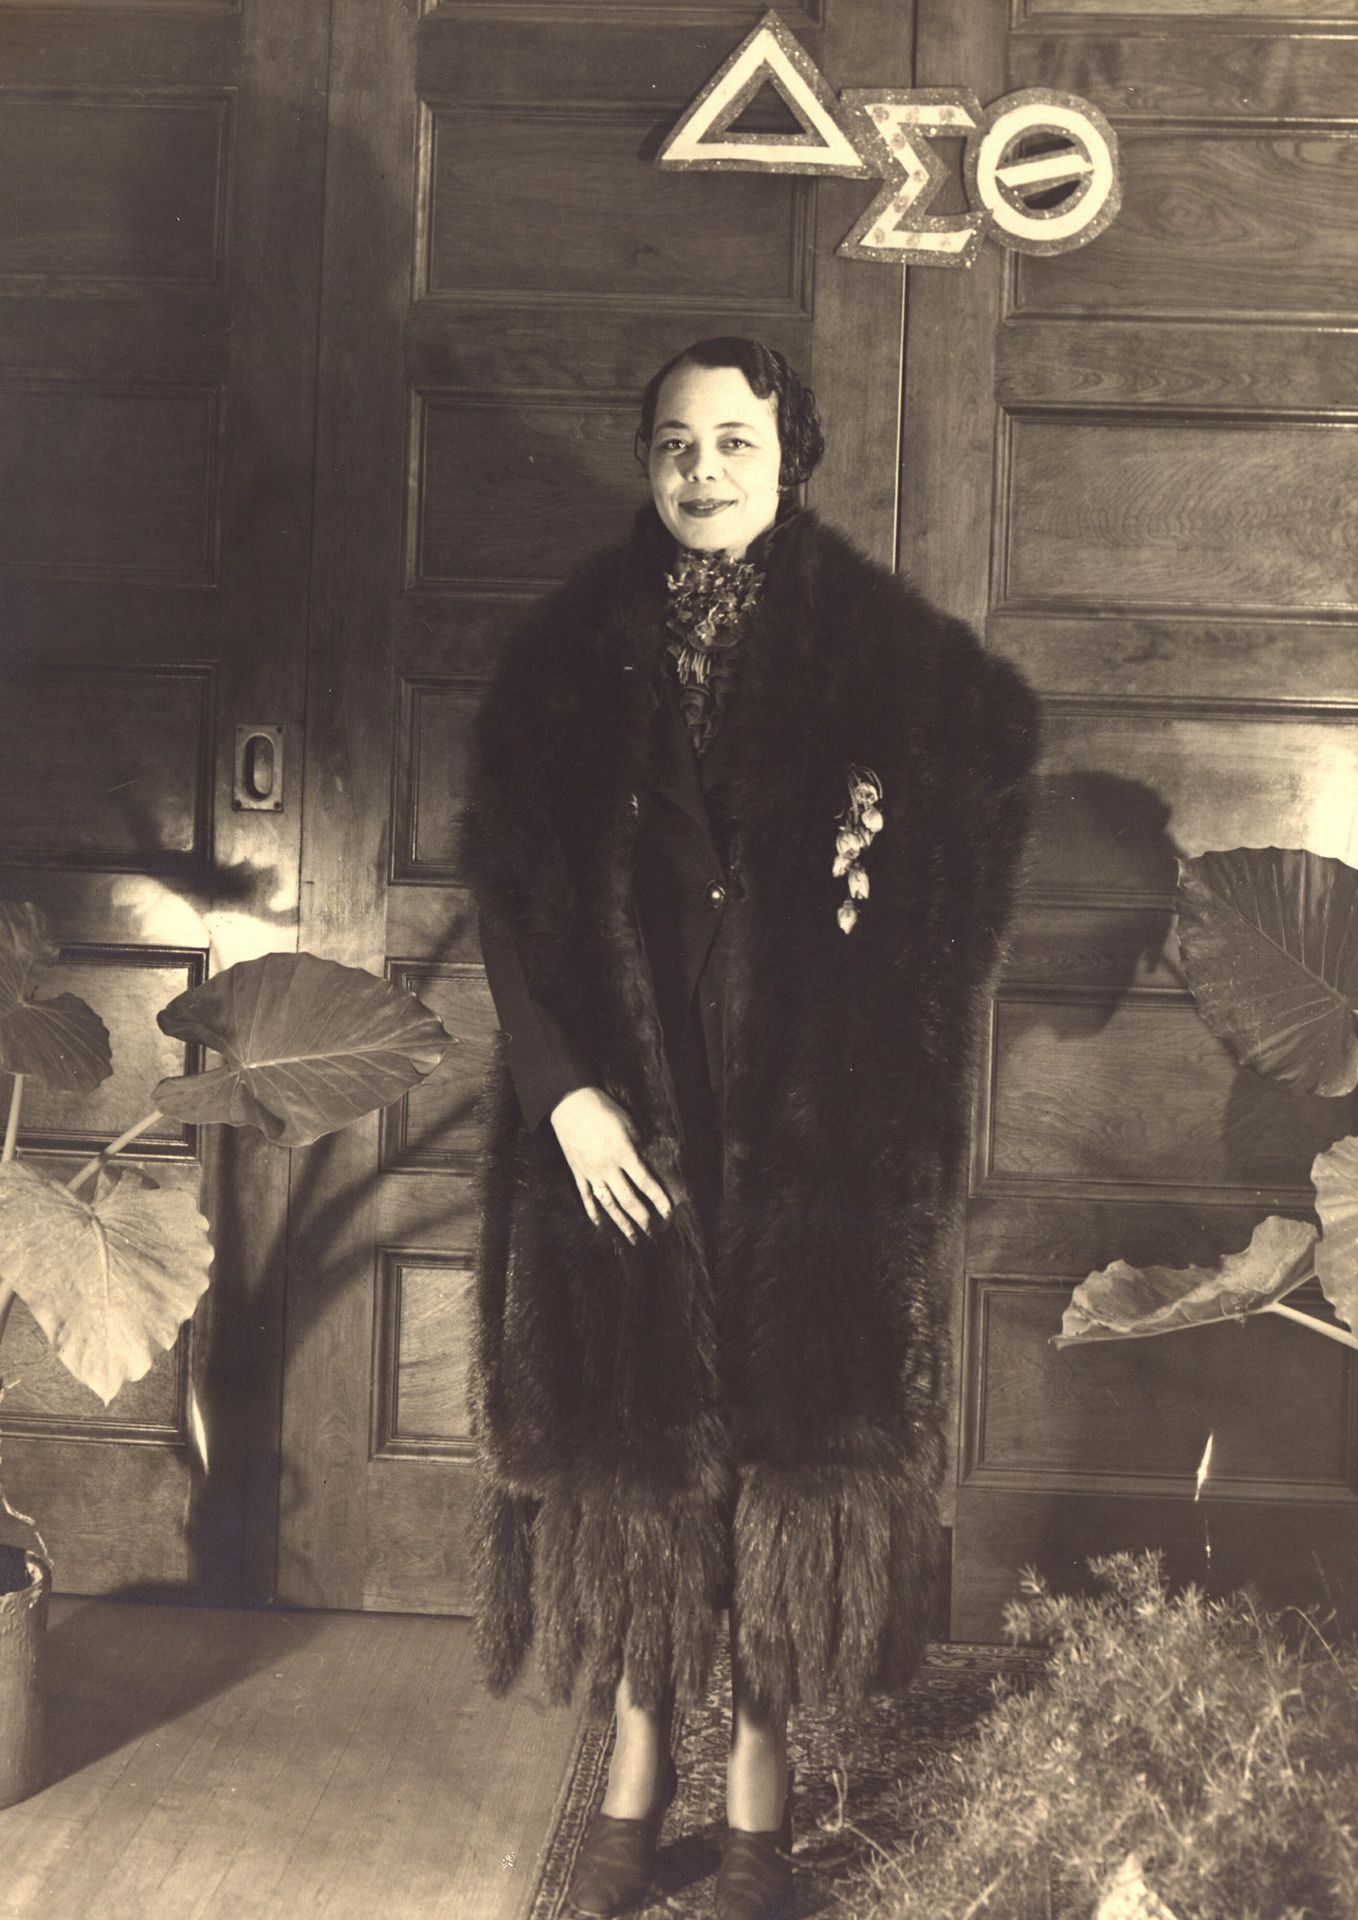 An old photograph of a woman in a fur coat in a Black sorority house